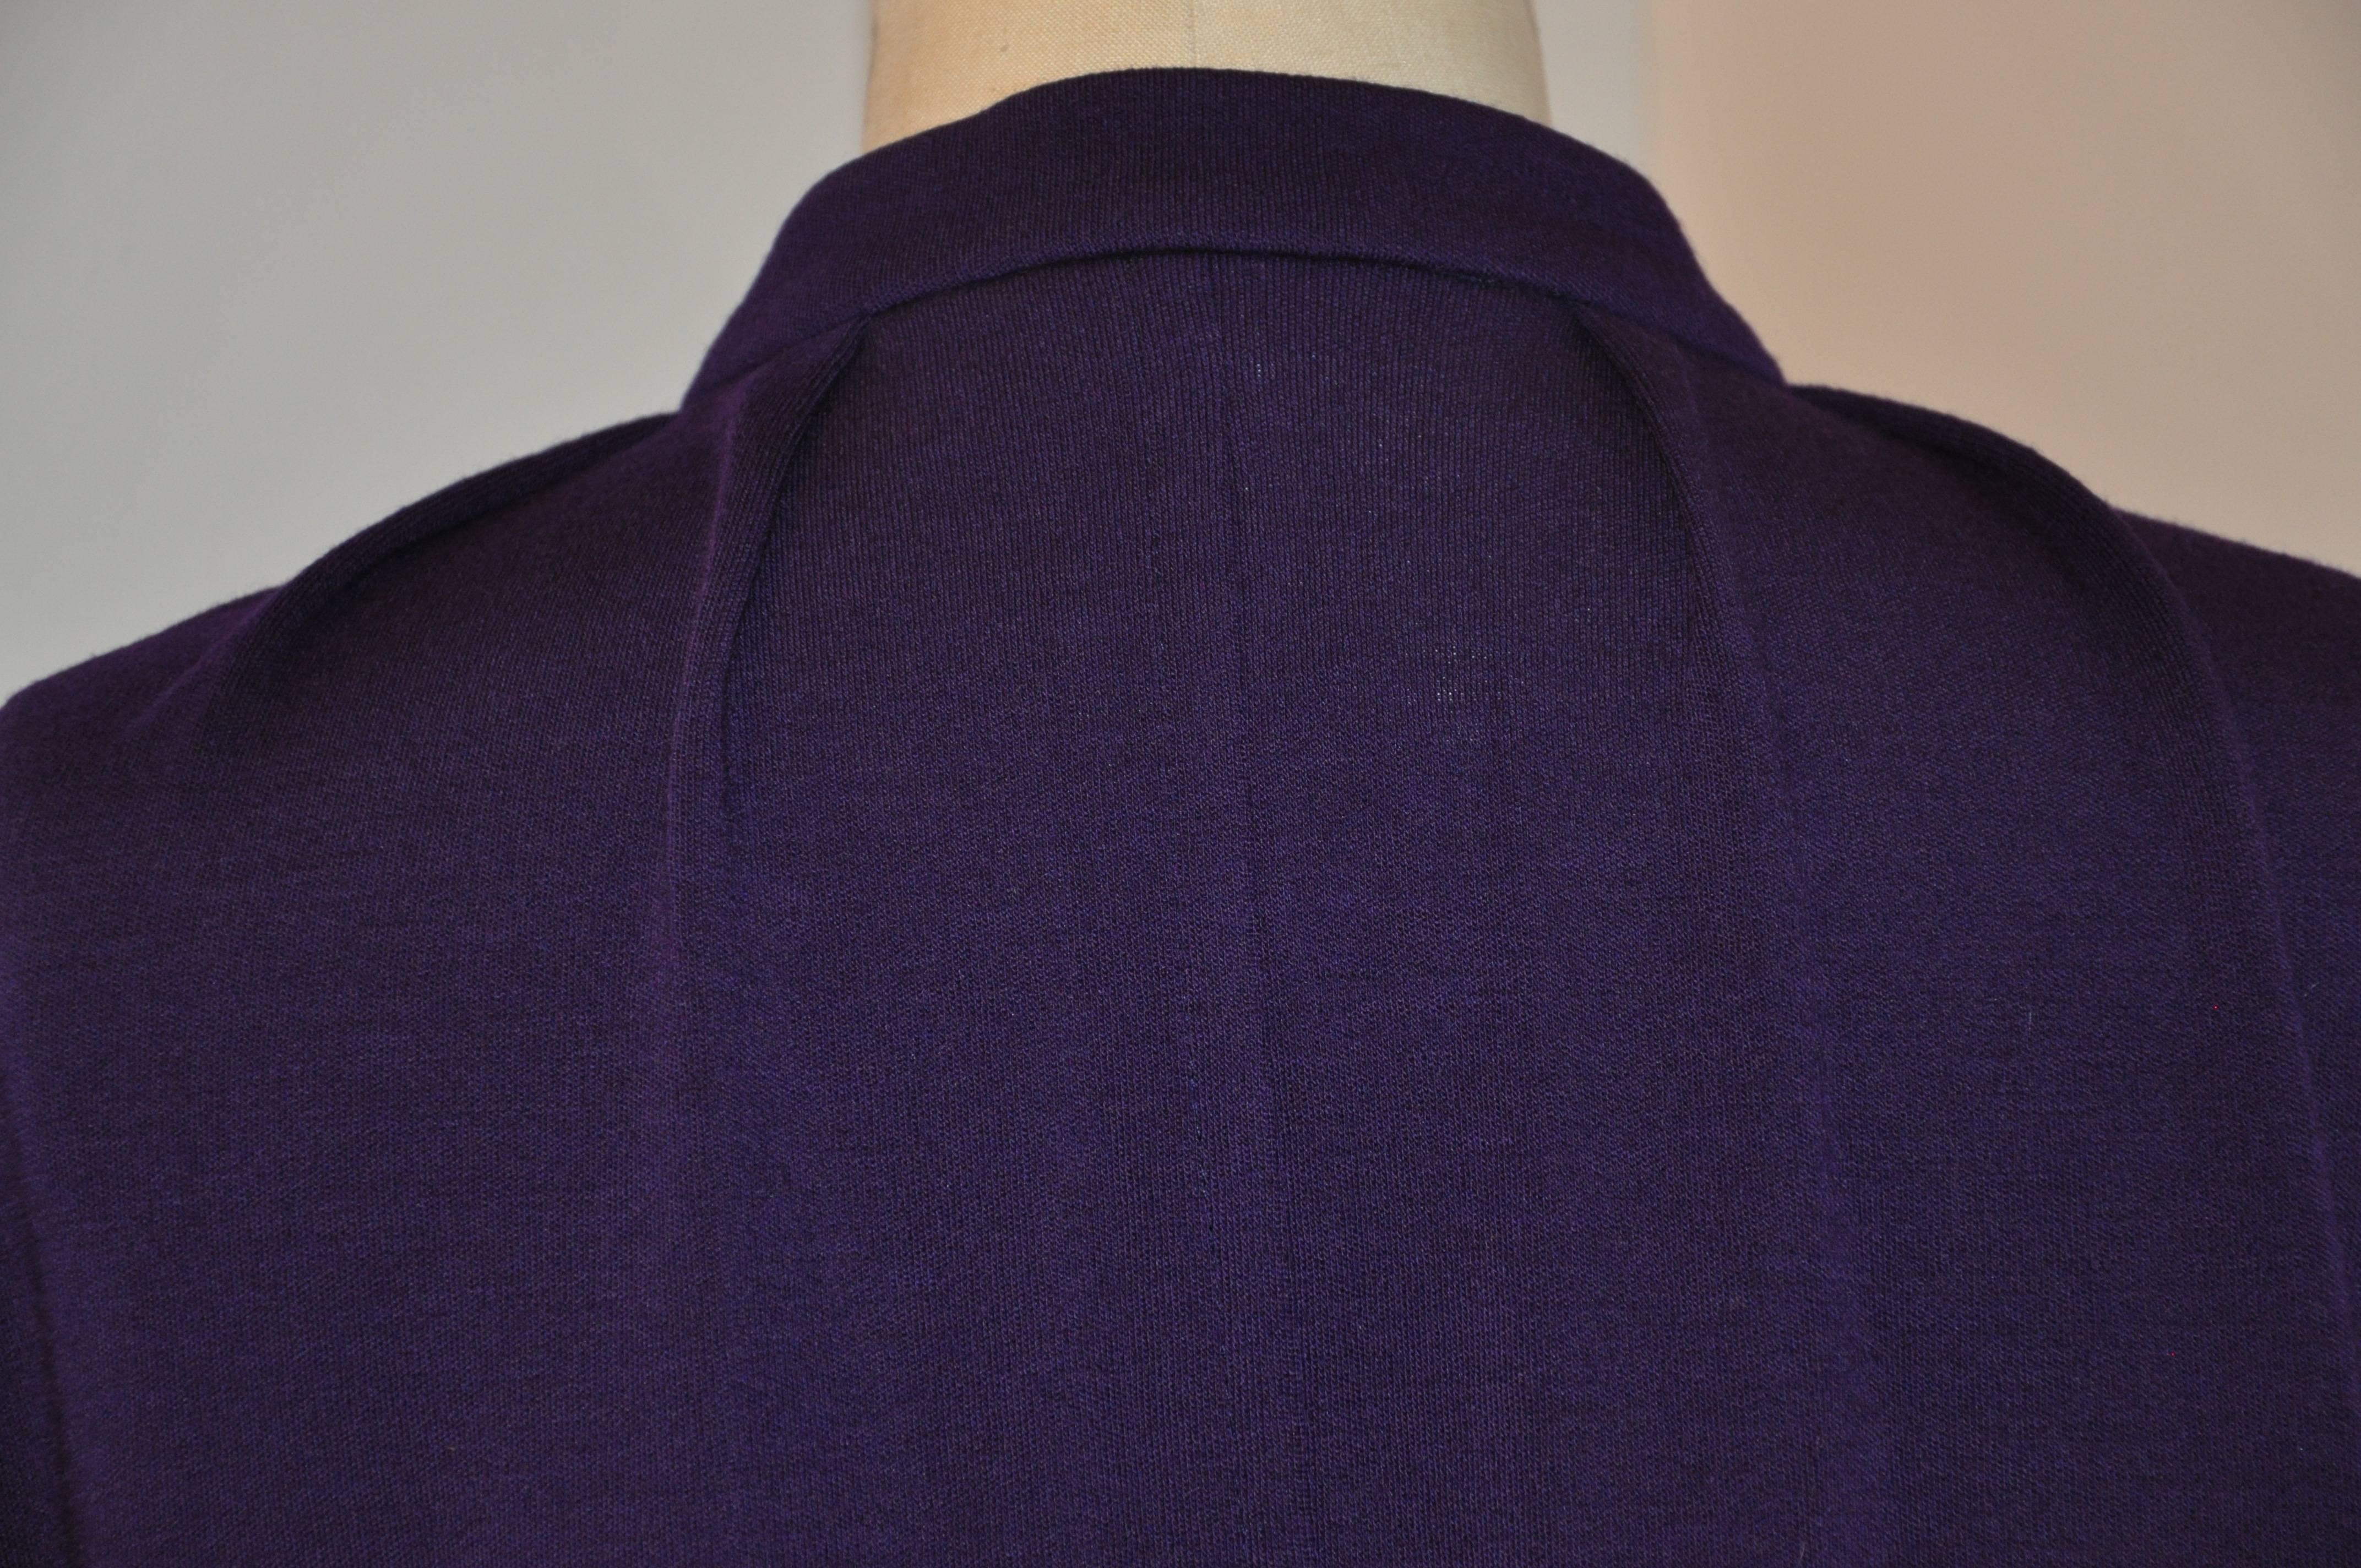 Rare Yves Saint Laurent Magnificent Deep Violet Wool Jersey Evening Cape In Good Condition For Sale In New York, NY